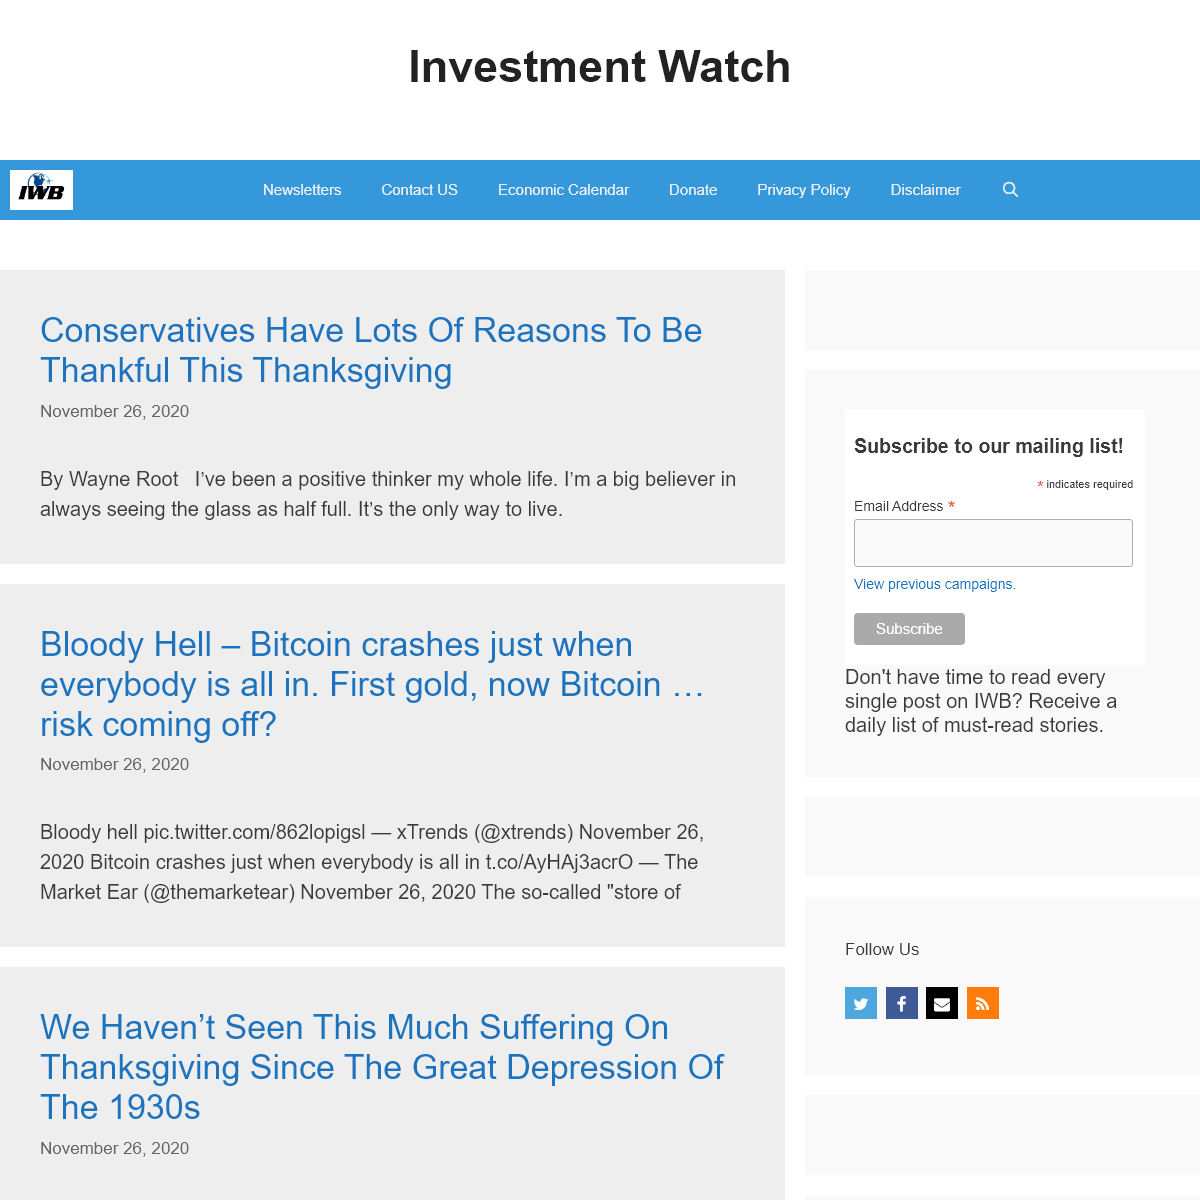 A complete backup of investmentwatchblog.com